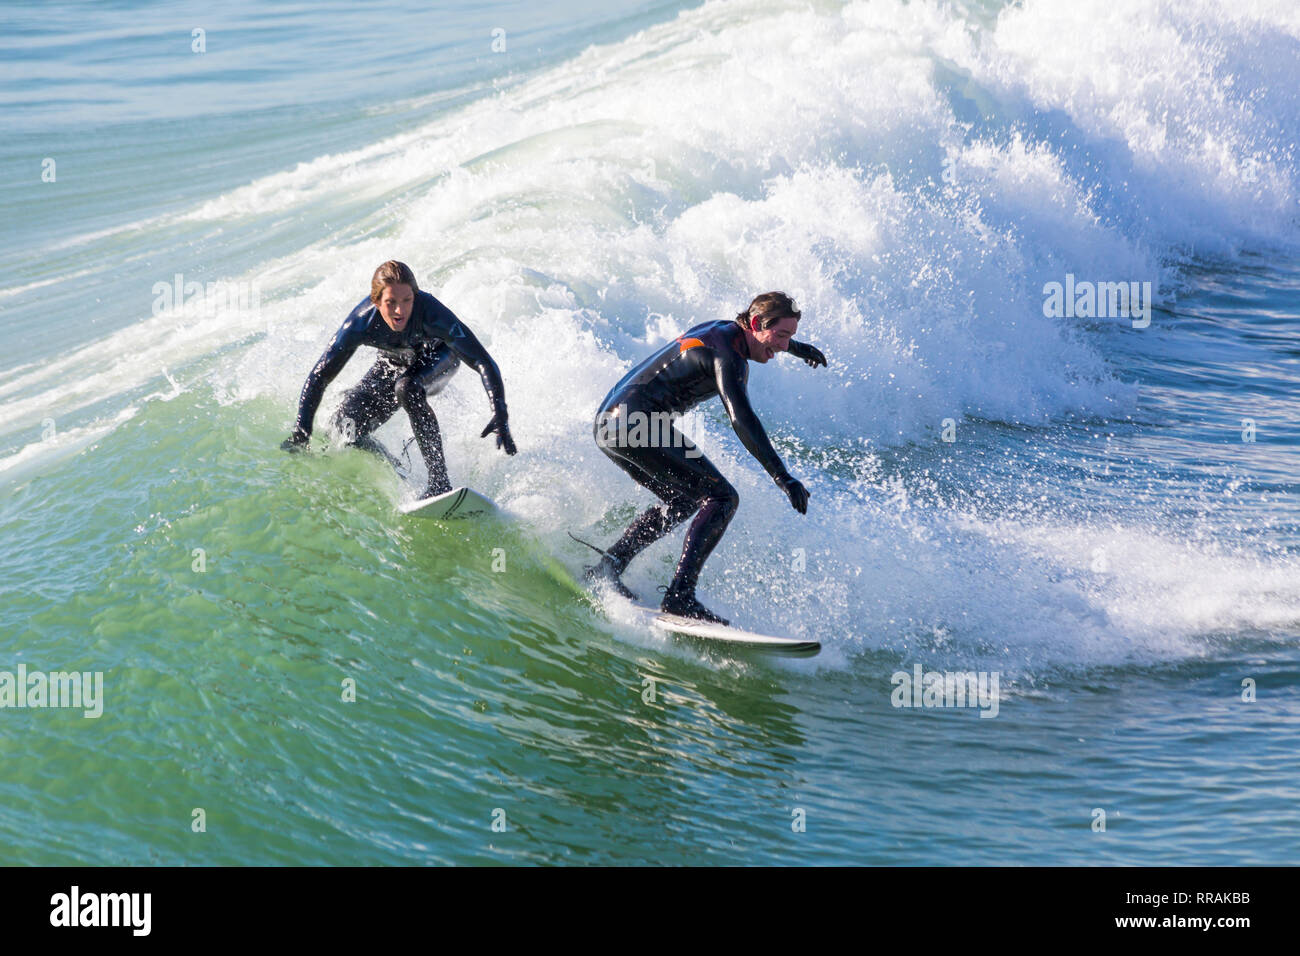 Bournemouth, Dorset, UK. 25th Feb, 2019. UK weather: big waves and plenty of surf create ideal surfing conditions for surfers at Bournemouth beach on a lovely warm sunny day expected to be the hottest day of the year and hottest February day ever.   Surfers on surf boards riding the waves. Credit: Carolyn Jenkins/Alamy Live News Stock Photo